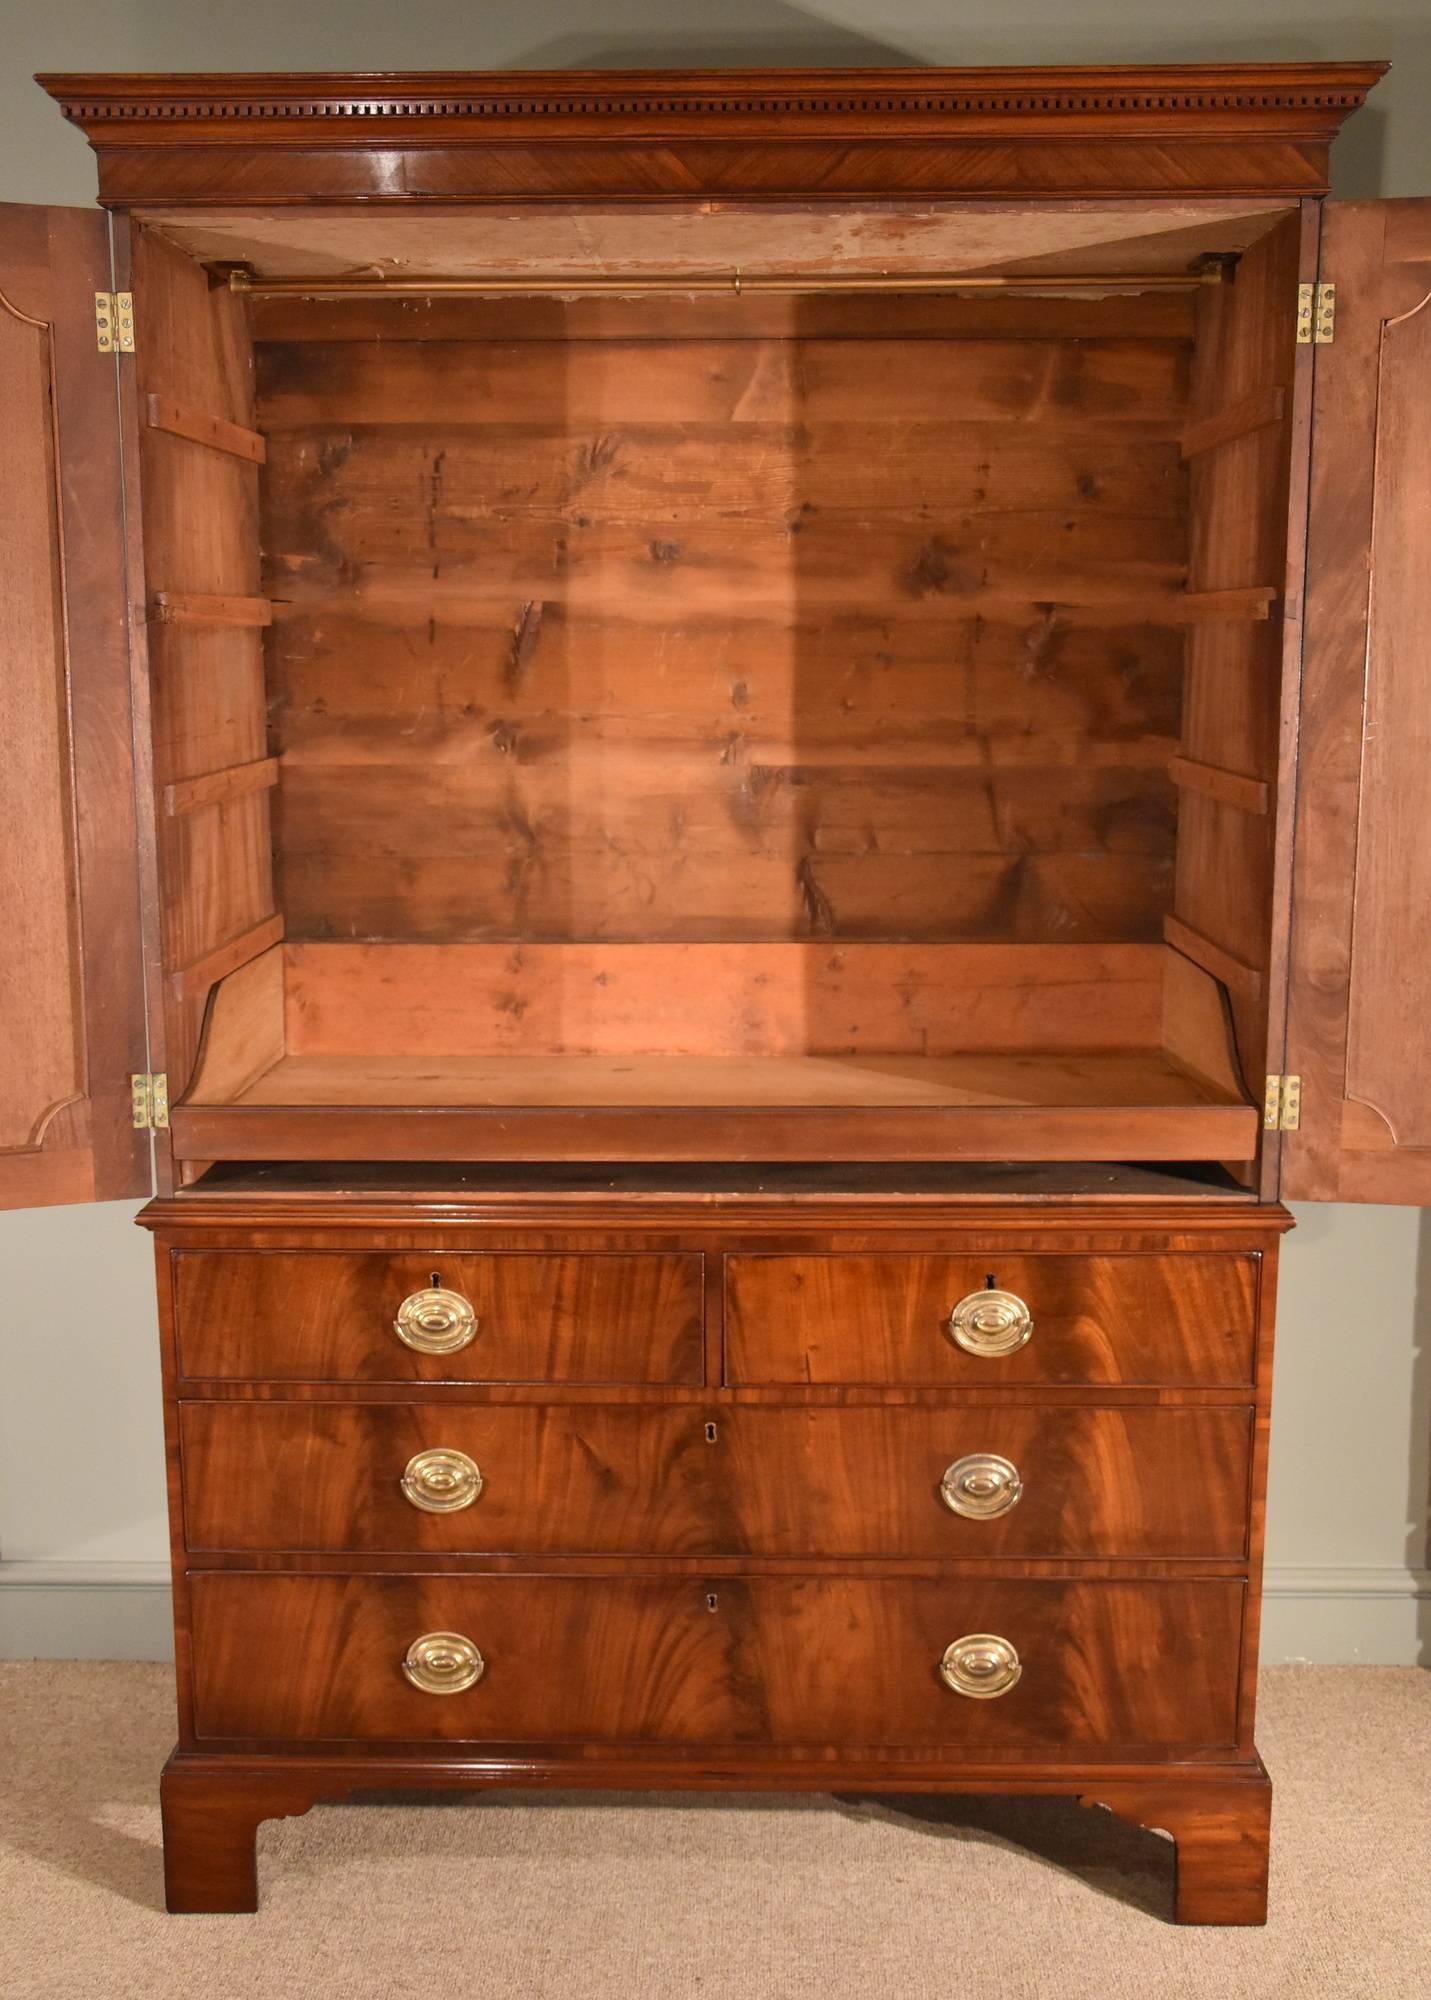 George III mahogany linen press with oval flamed panels and quarter veneered doors all over. Two short and three long drawers.

Dimensions:
Height 76